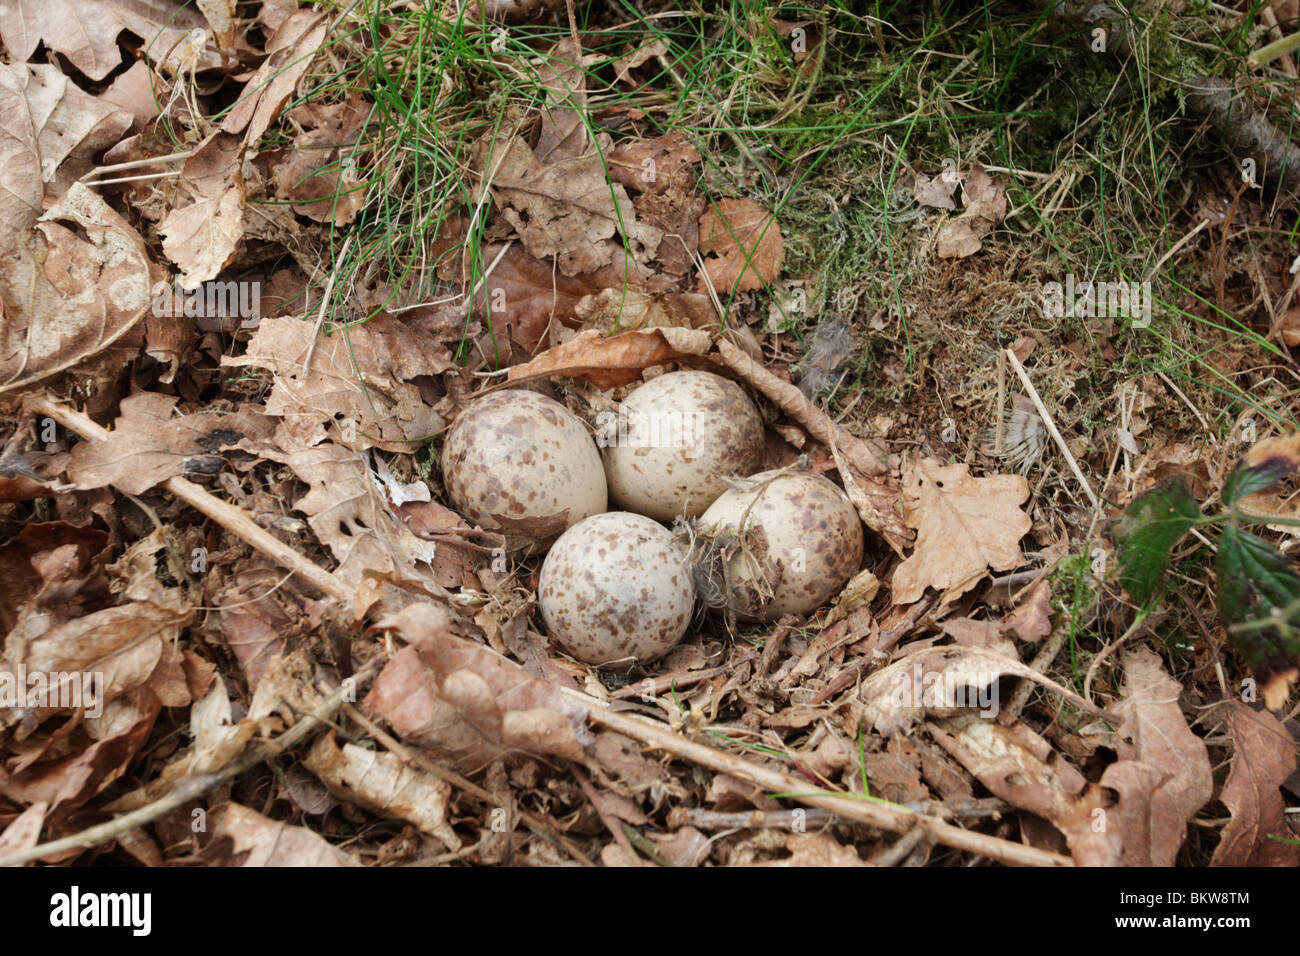 Woodcock, Scolopax rusticola, four eggs in nest in oak leaves, Derbyshire, May 2010 Stock Photo